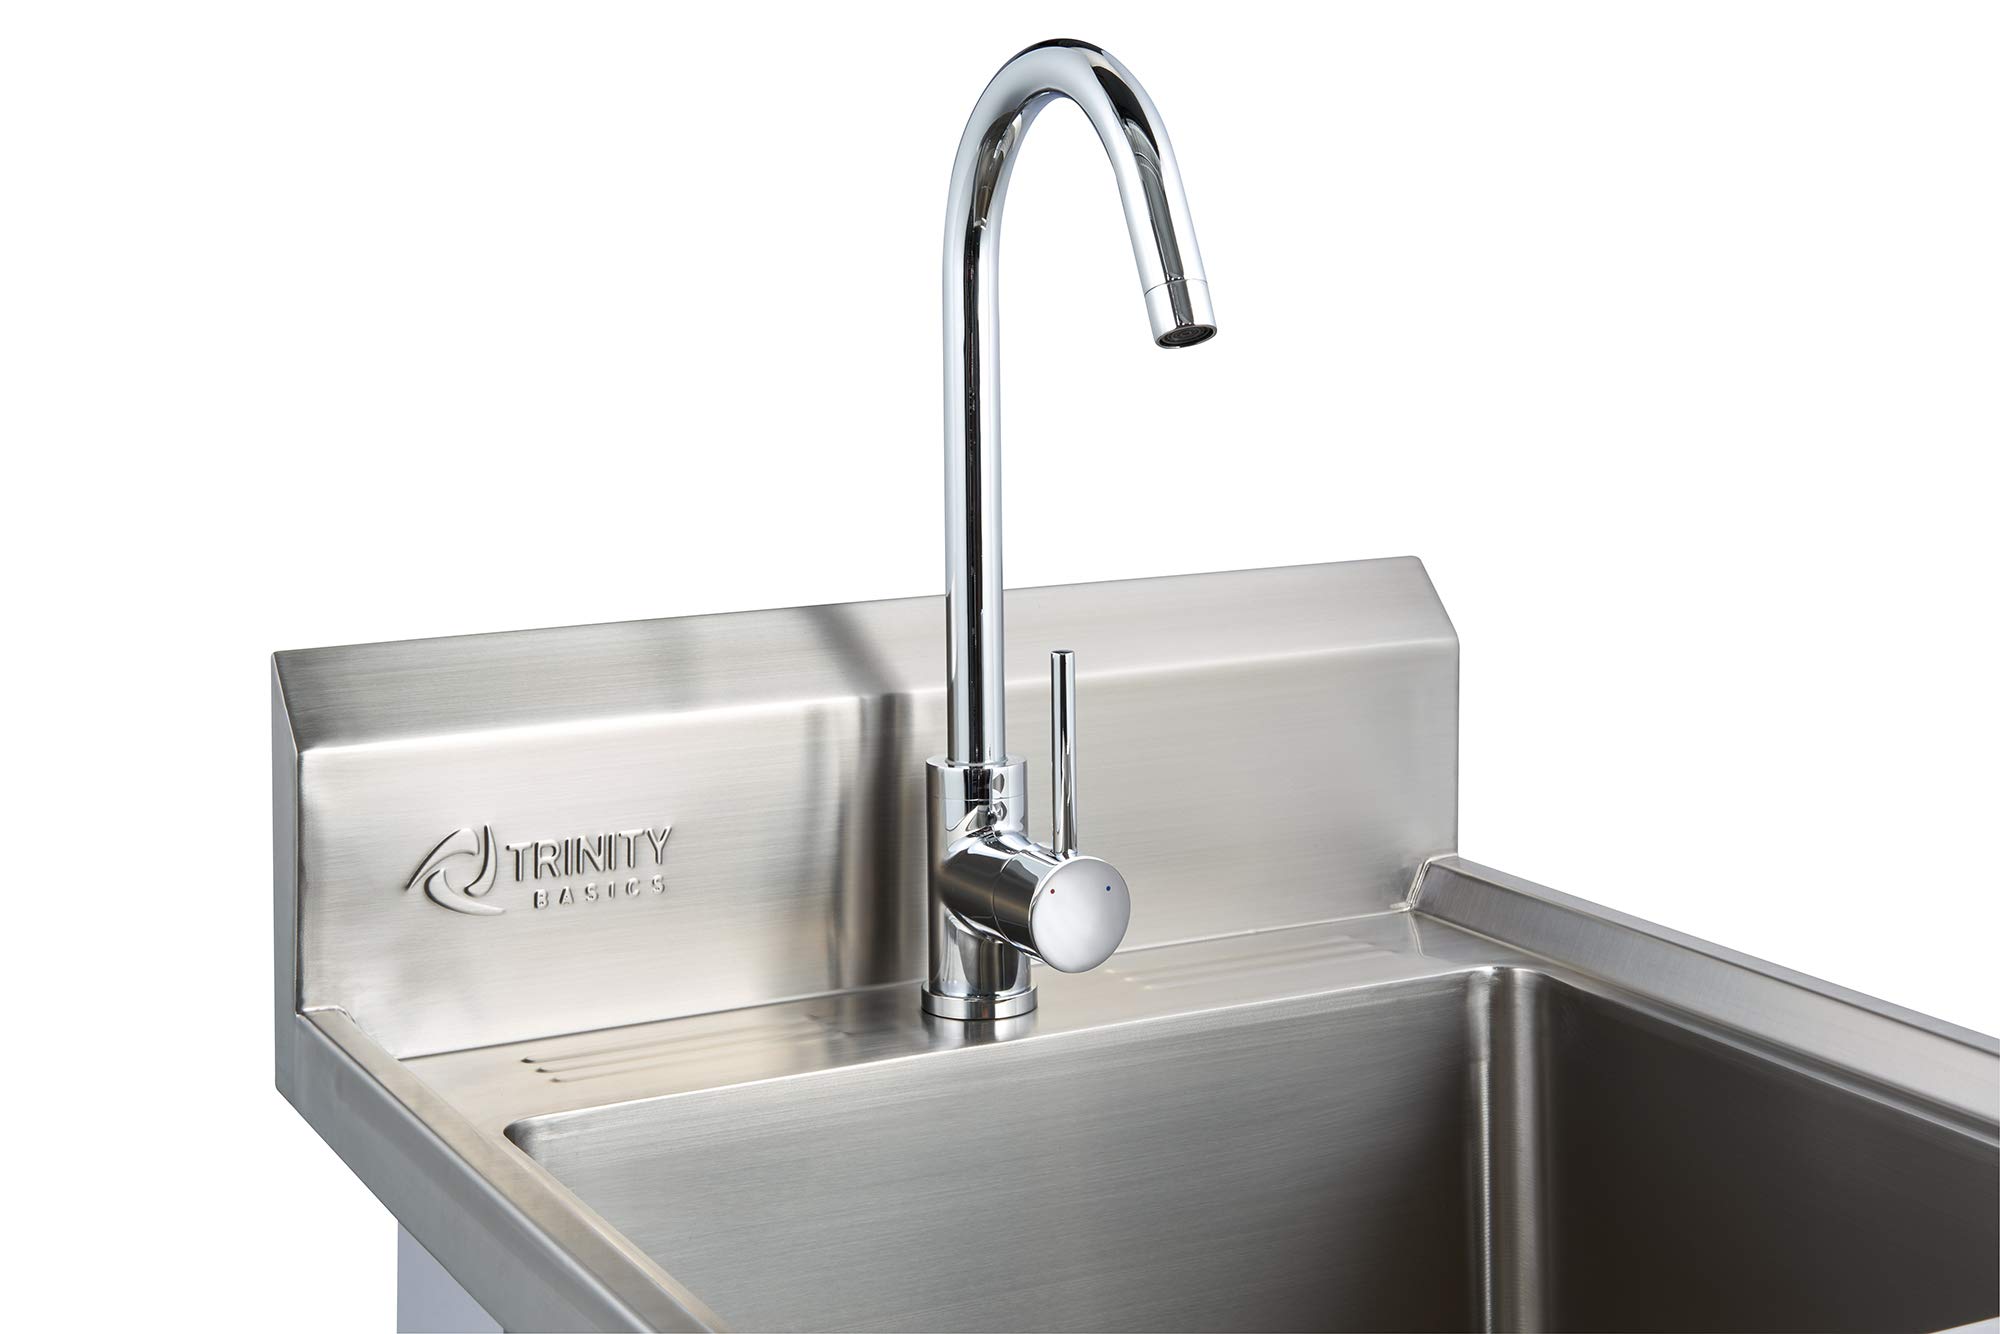 TRINITY CGL-02-009-0010 Basics Stainless Steel Freestanding Single Bowl Utility Sink for Garage, Laundry Room, and Restaurants, Includes Faucet, NSF Certified, 49.2 21.5 24-Inch, Chrome